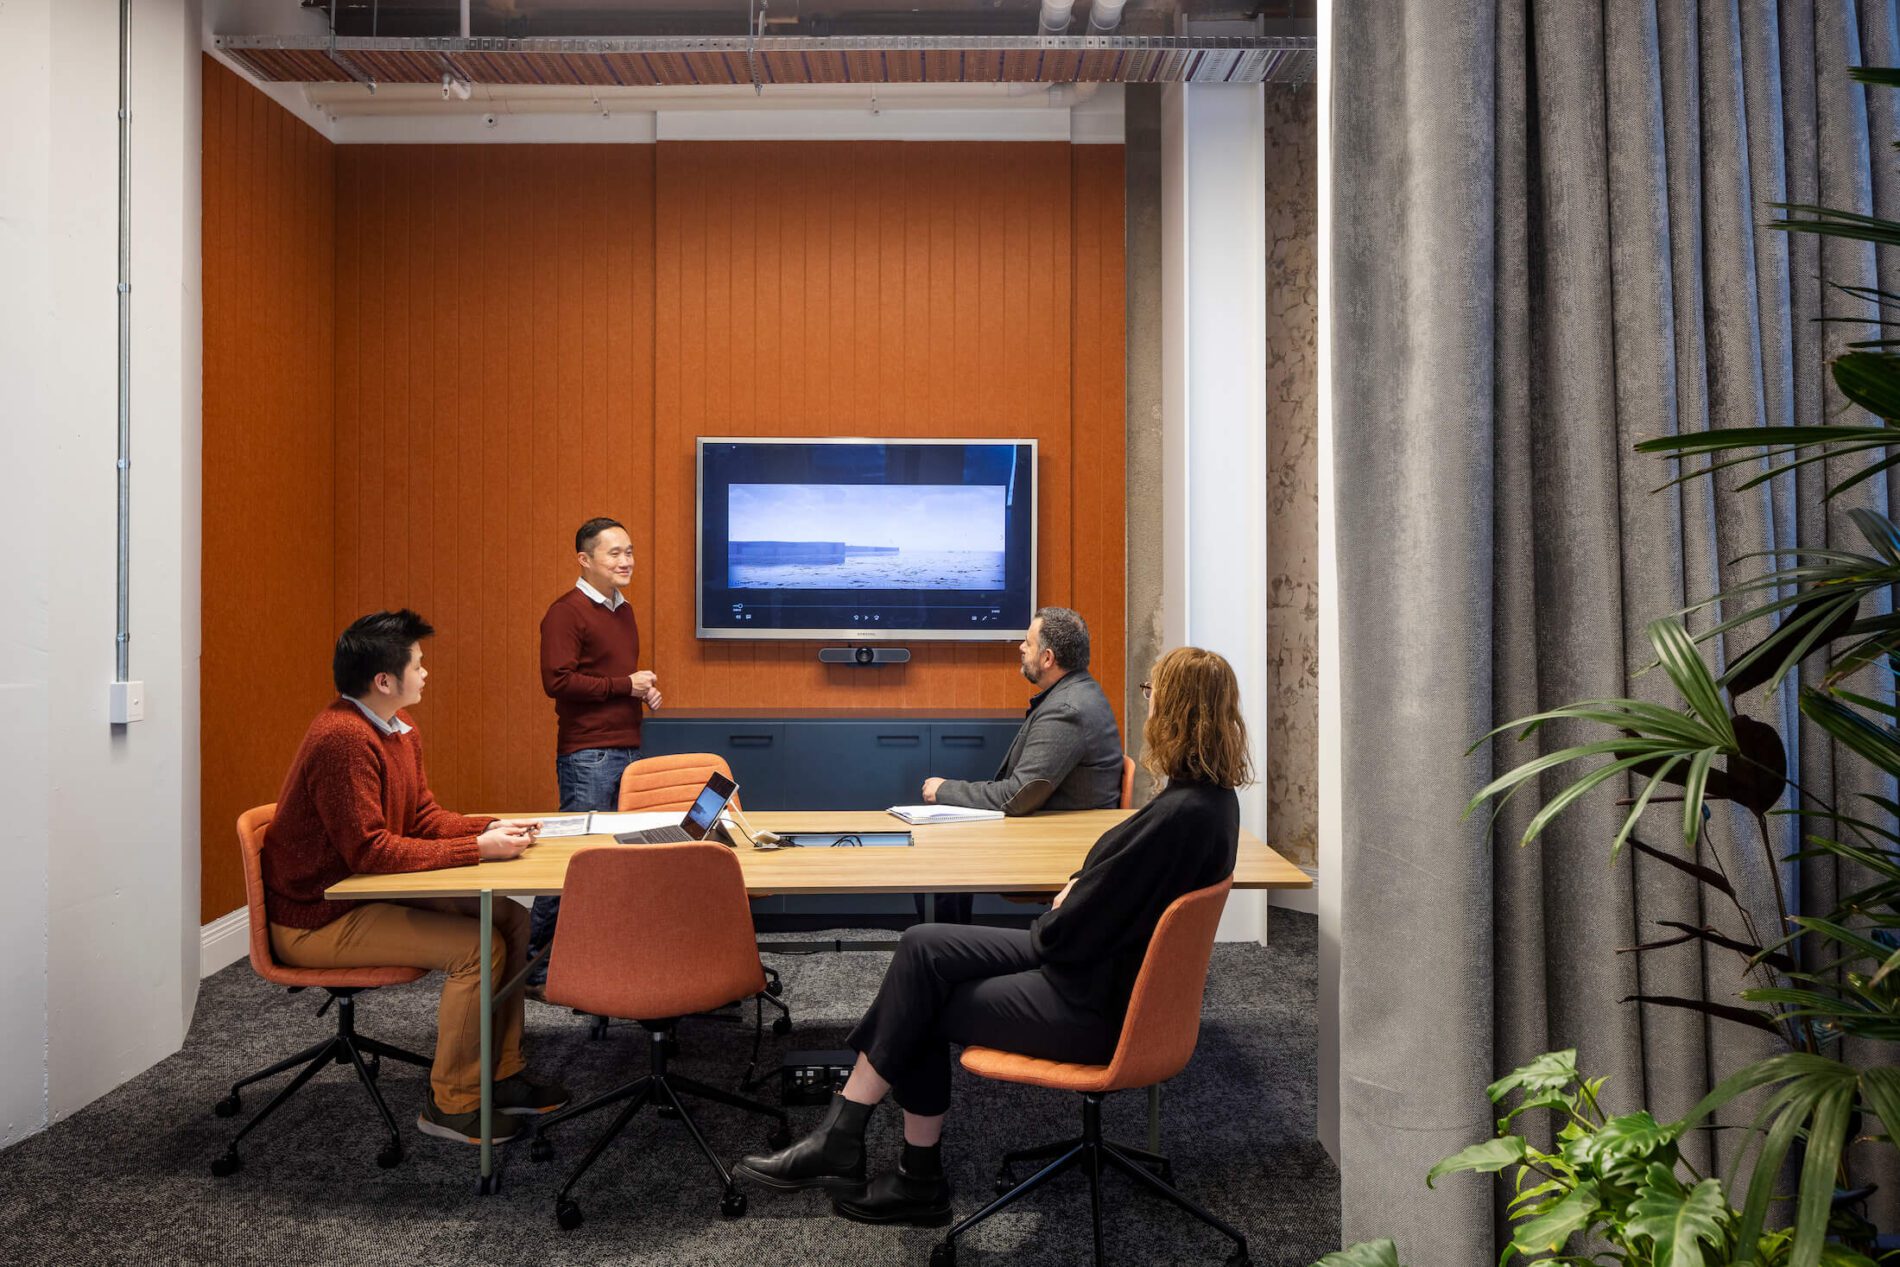 Three staff members in a meeting room sit at a table listening to another staff member present, using a video display.